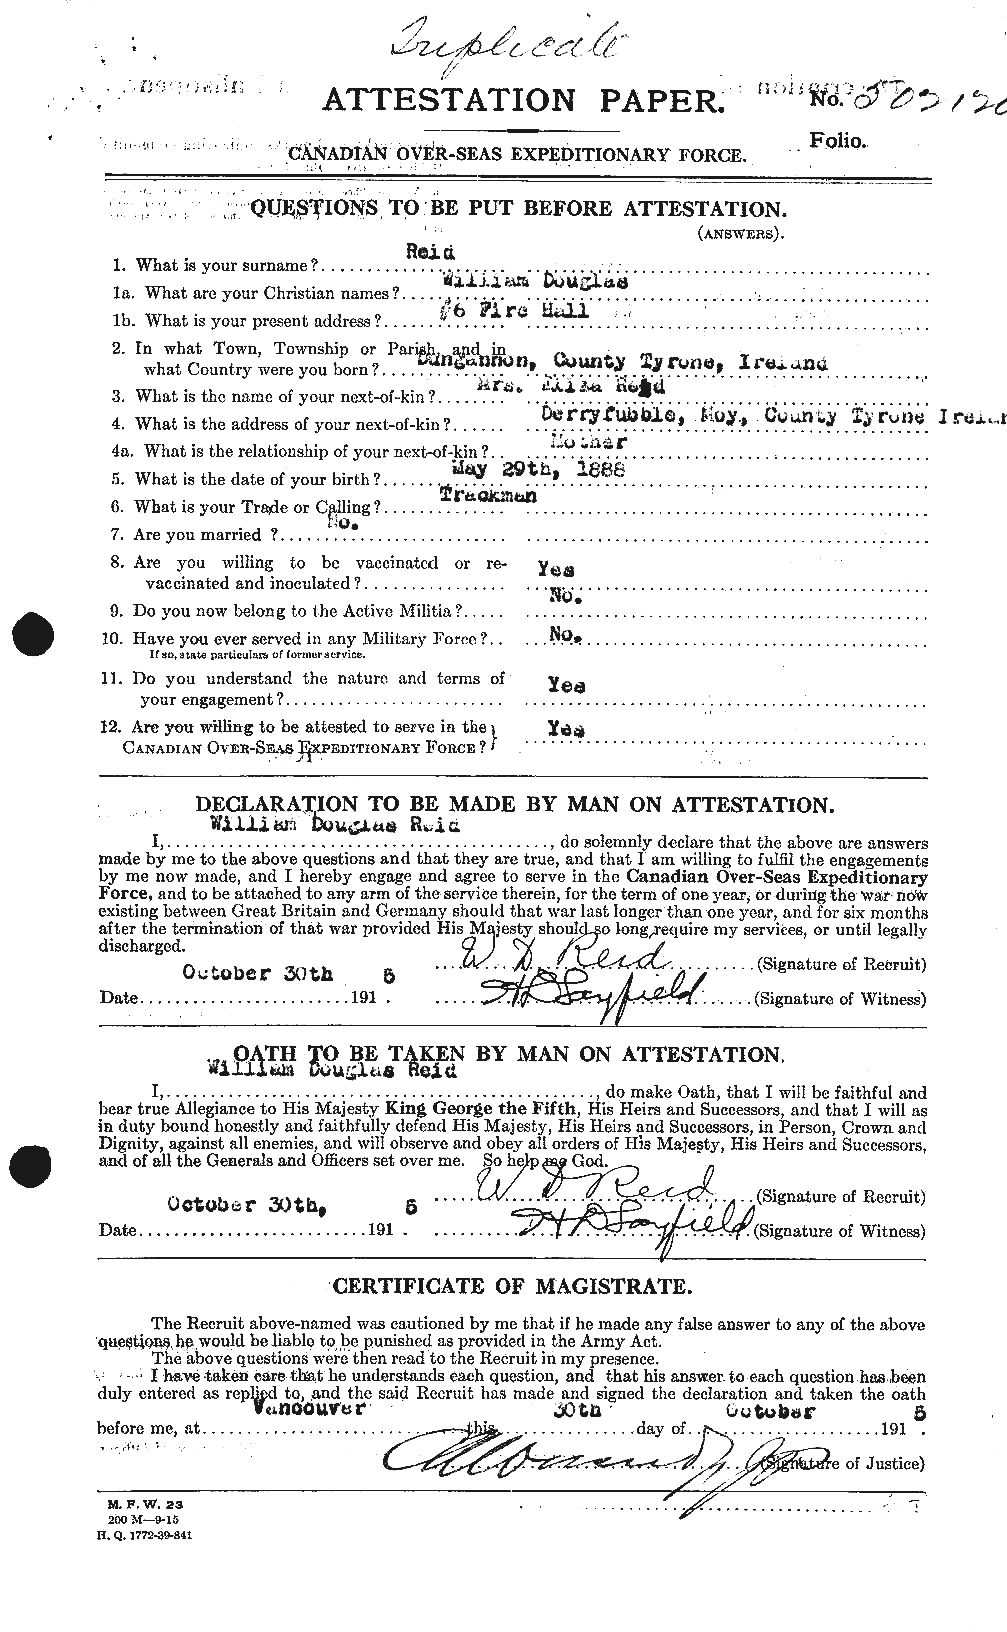 Personnel Records of the First World War - CEF 596978a